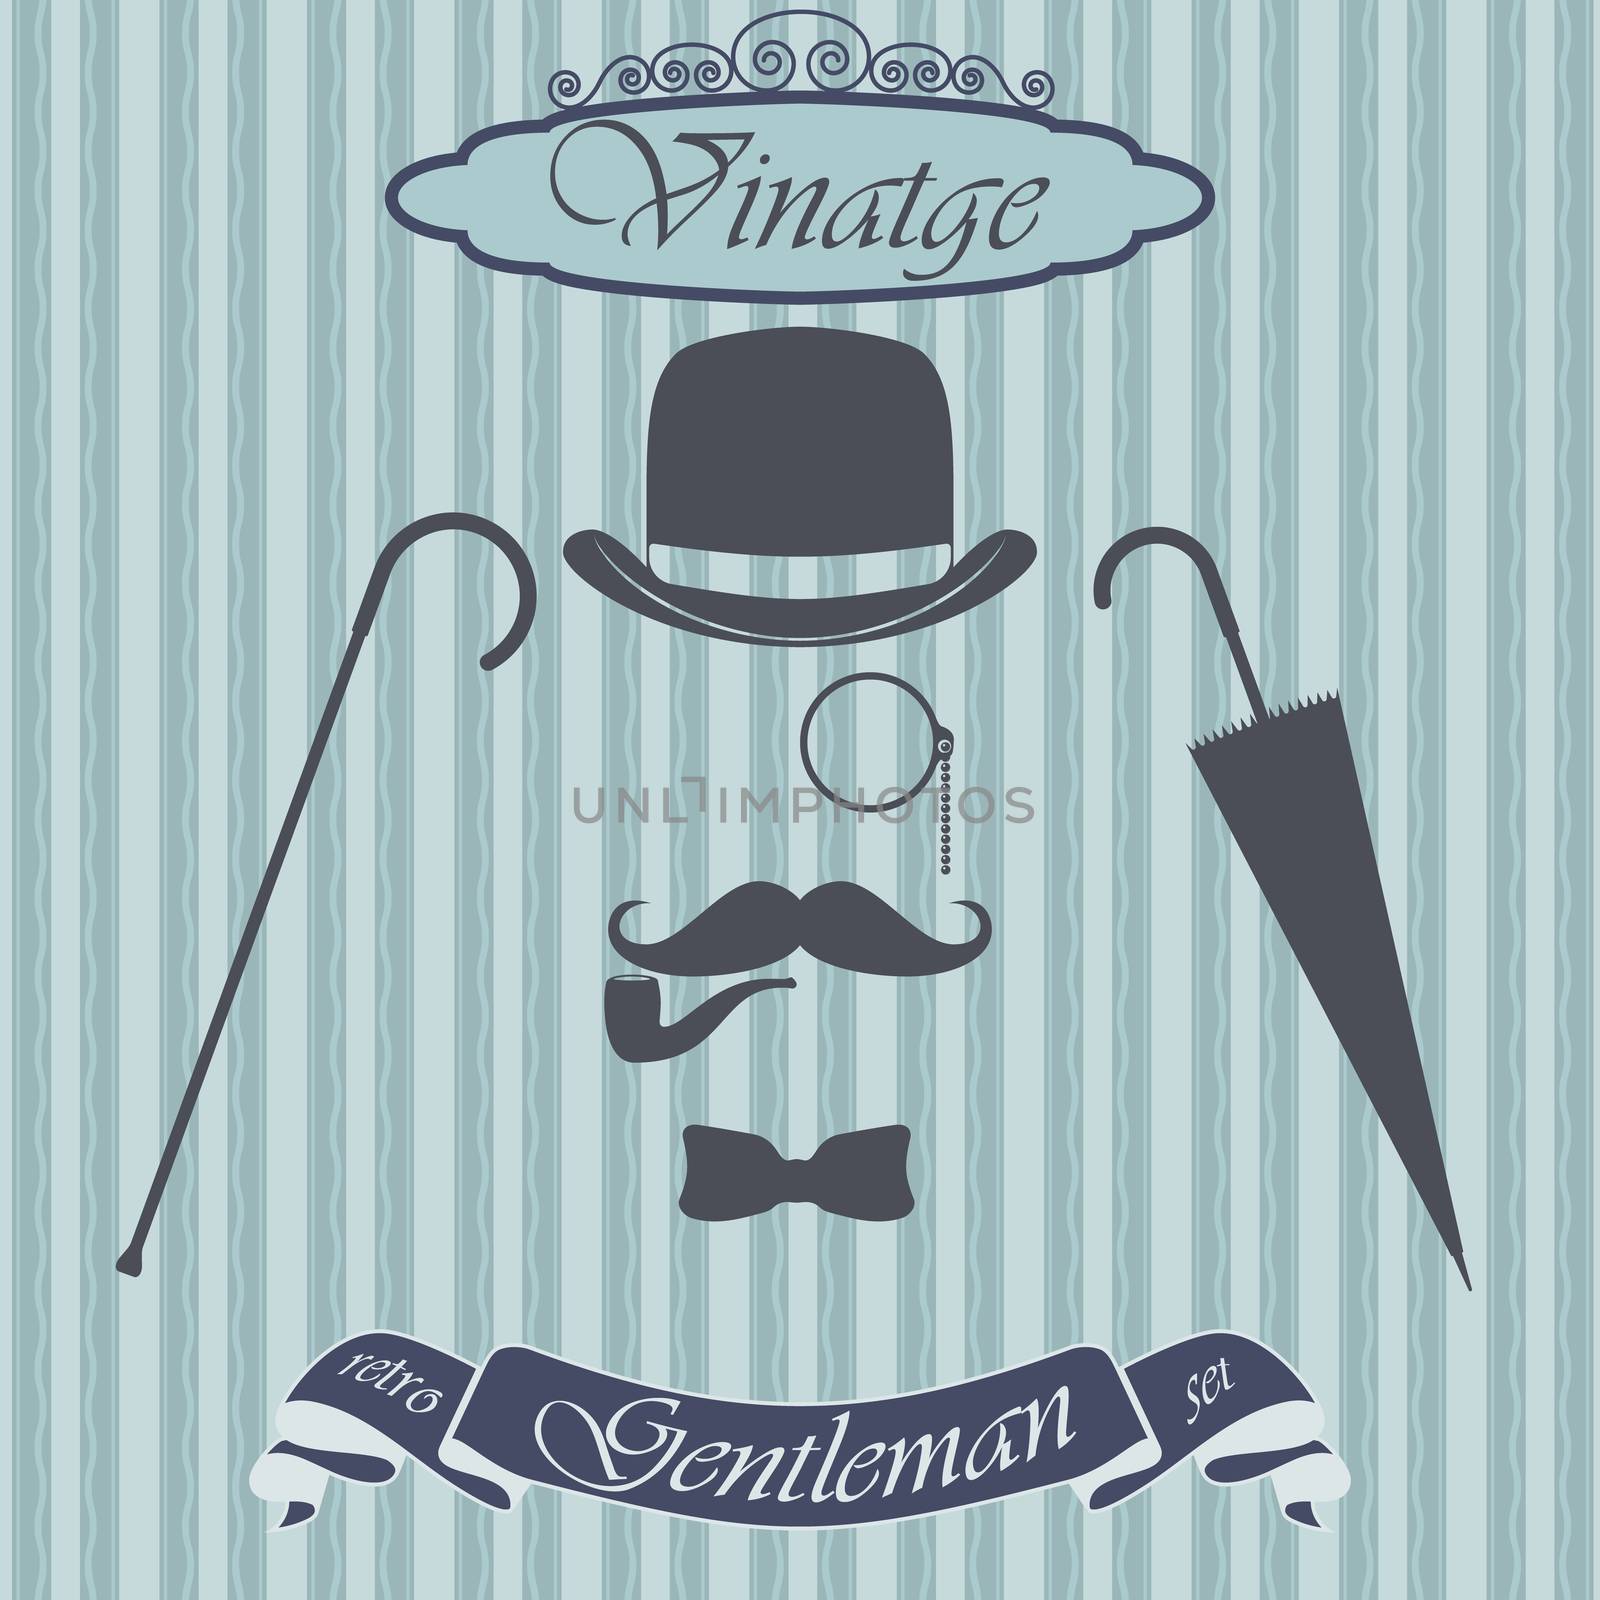 Retro gentleman elements set - bowler, moustache, tobacco pipe monocle, cane and umbrella, on hipster background. Vintage sign design. Old fashiond theme label.